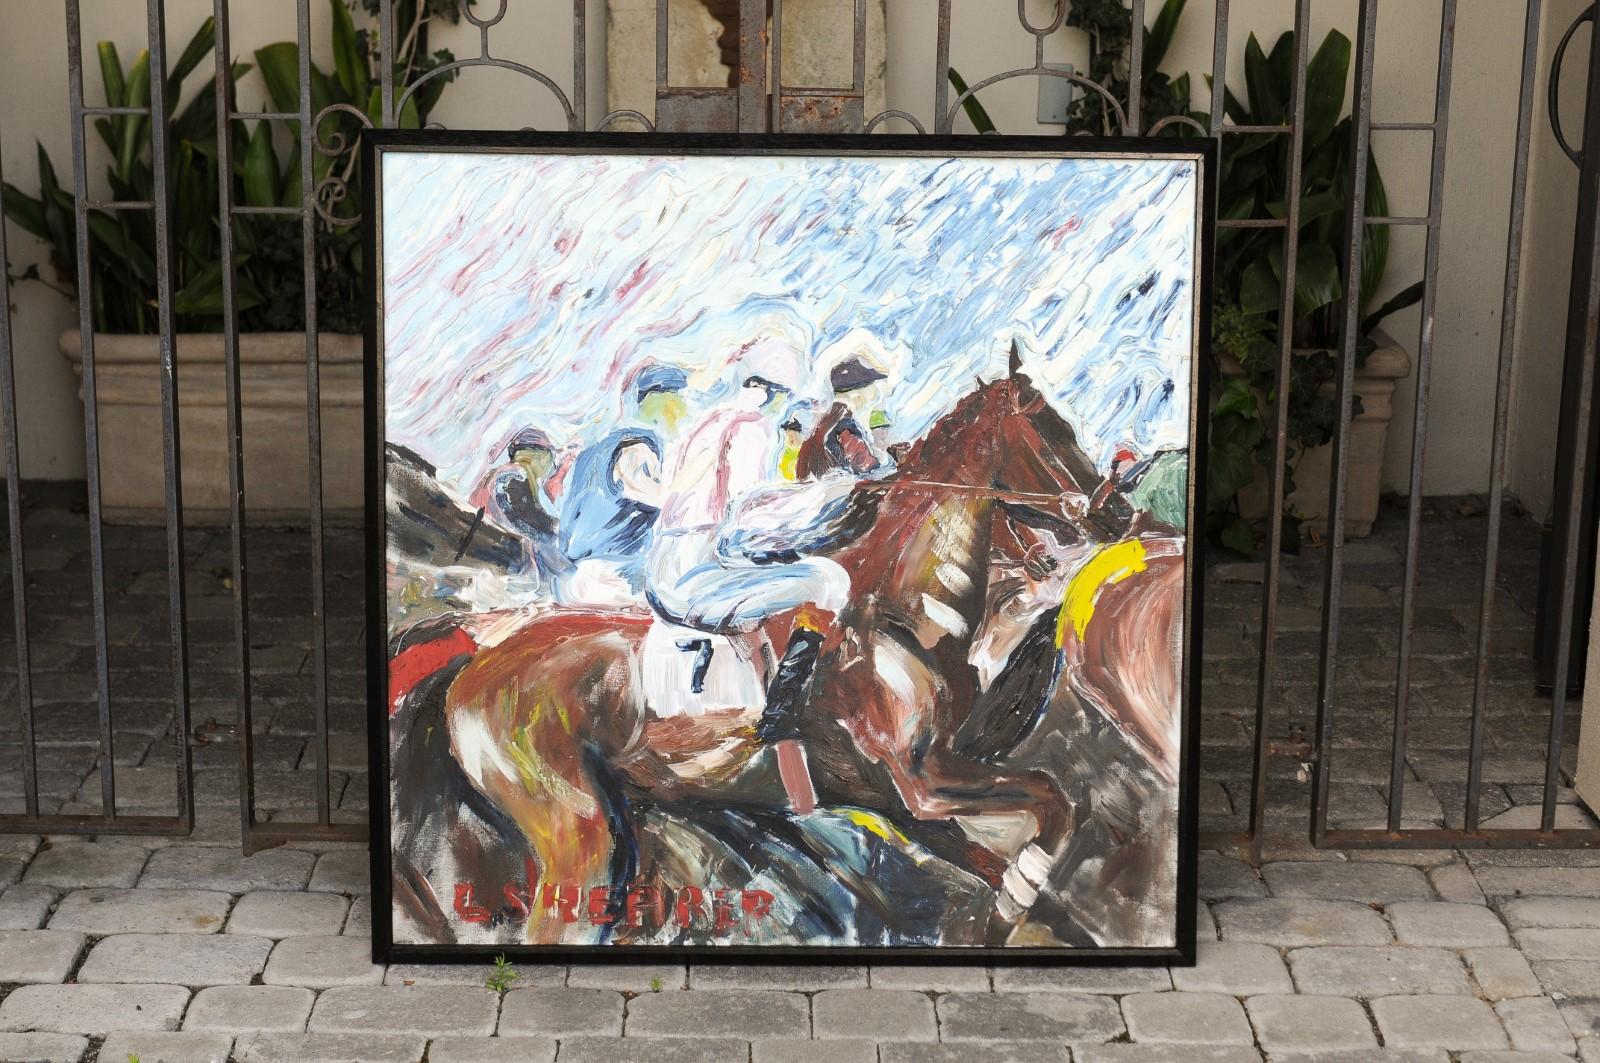 A framed oil on canvas horse racing painting from the mid-20th century, depicting jockeys on their horses. Born during the midcentury period, this lovely oil on canvas painting features a palette made of blue, white, brown and red tones among